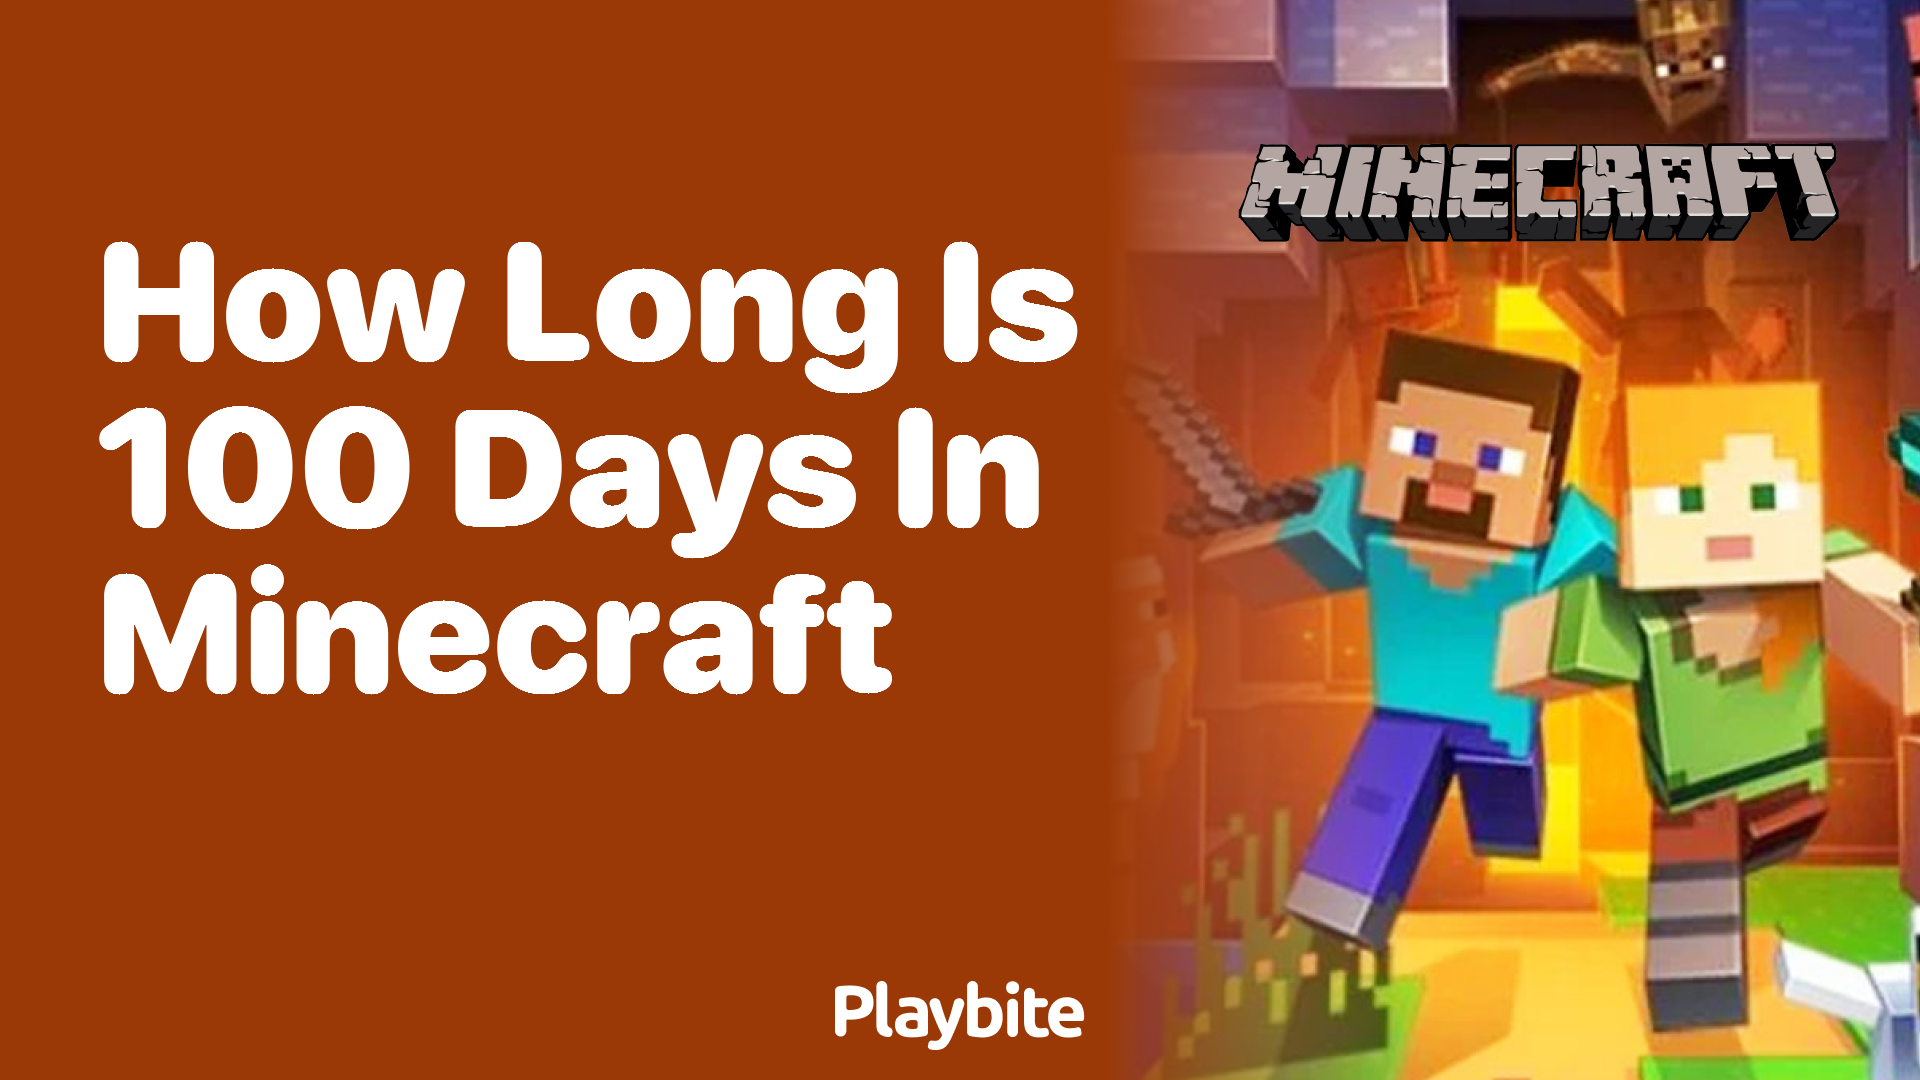 How Long is 100 Days in Minecraft?